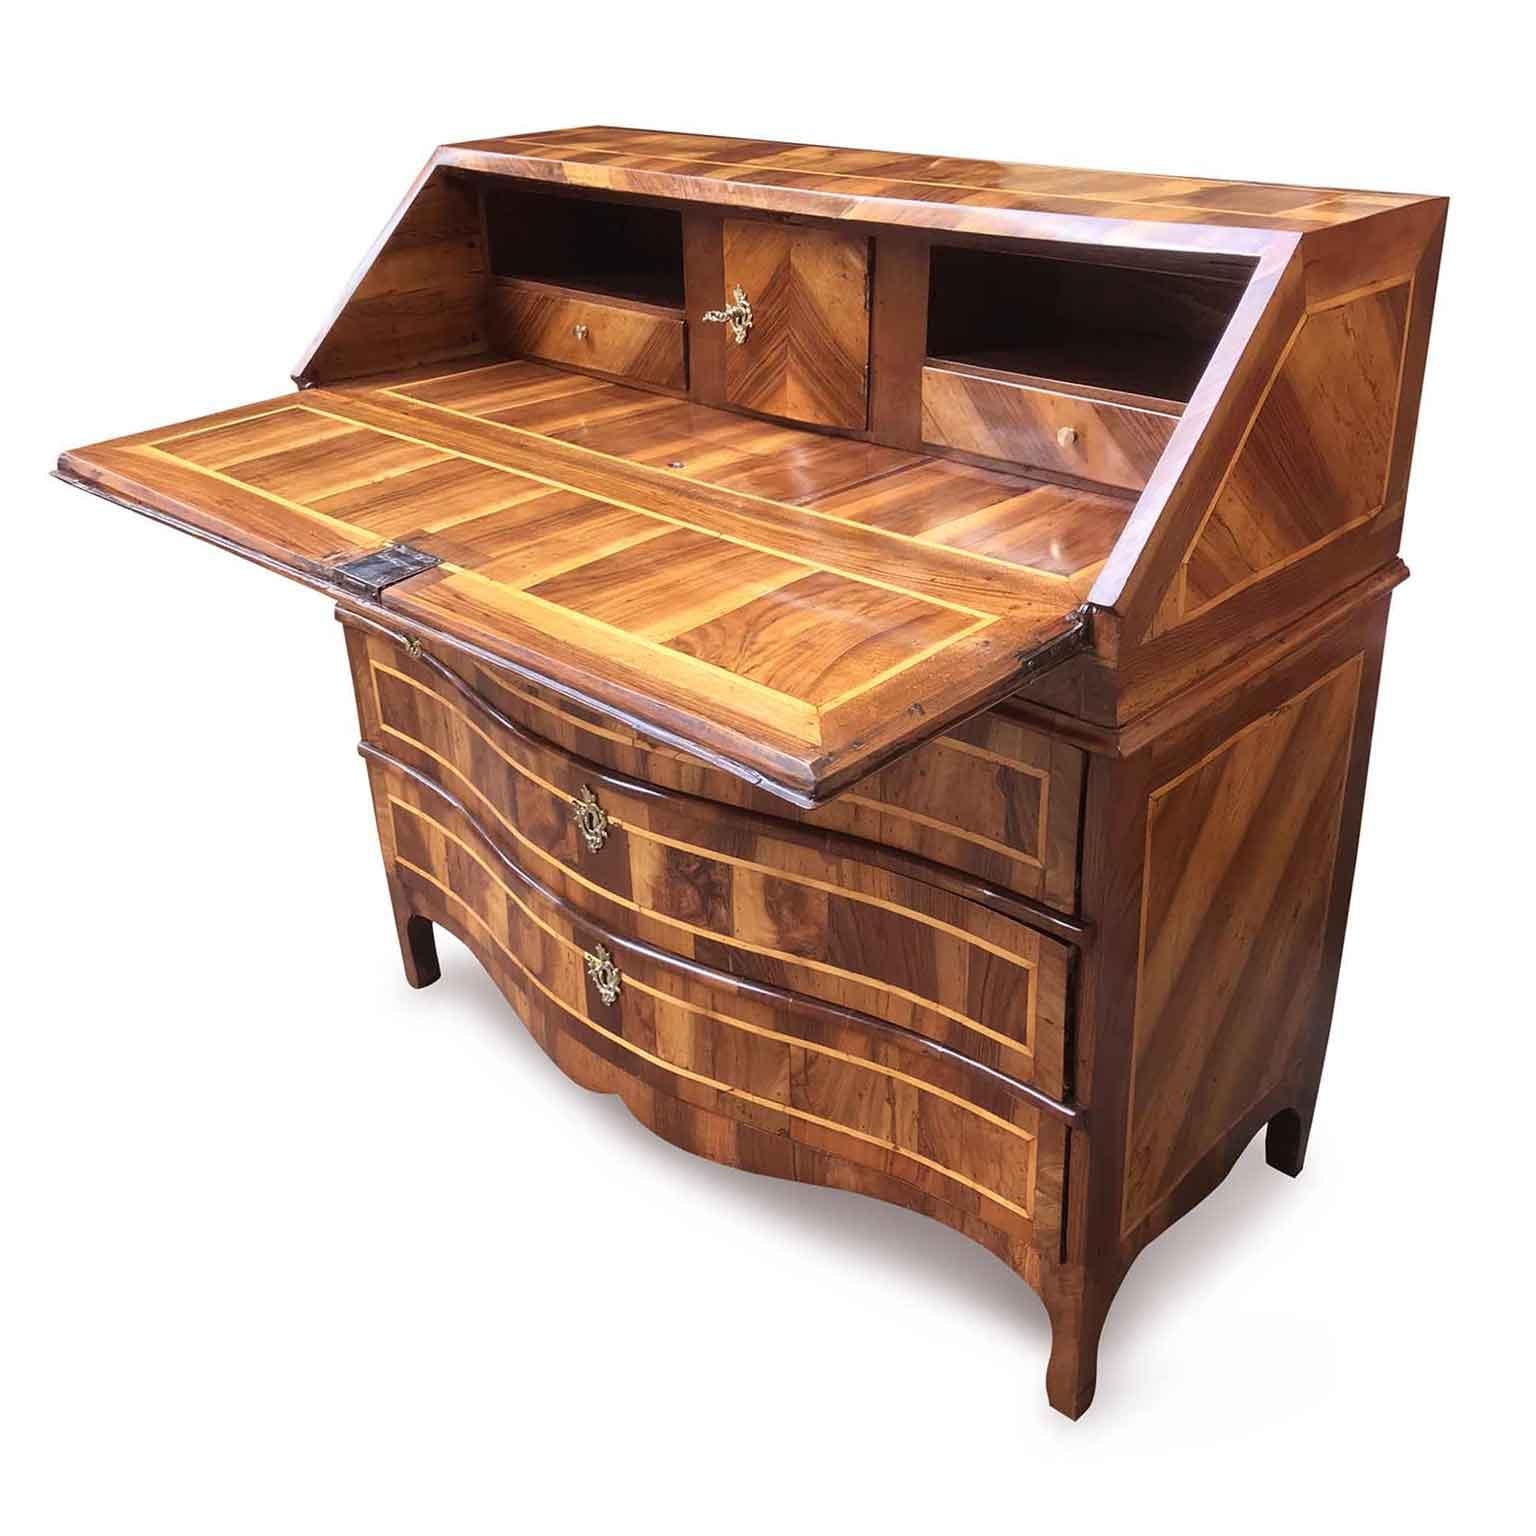 An Italian bureau with flap dating back to the second half of 18th century. A slightly curved front, three deep drawers and a fall-front opening to reveal an interior with two small drawers, compartments one small door and hiding secrets, see